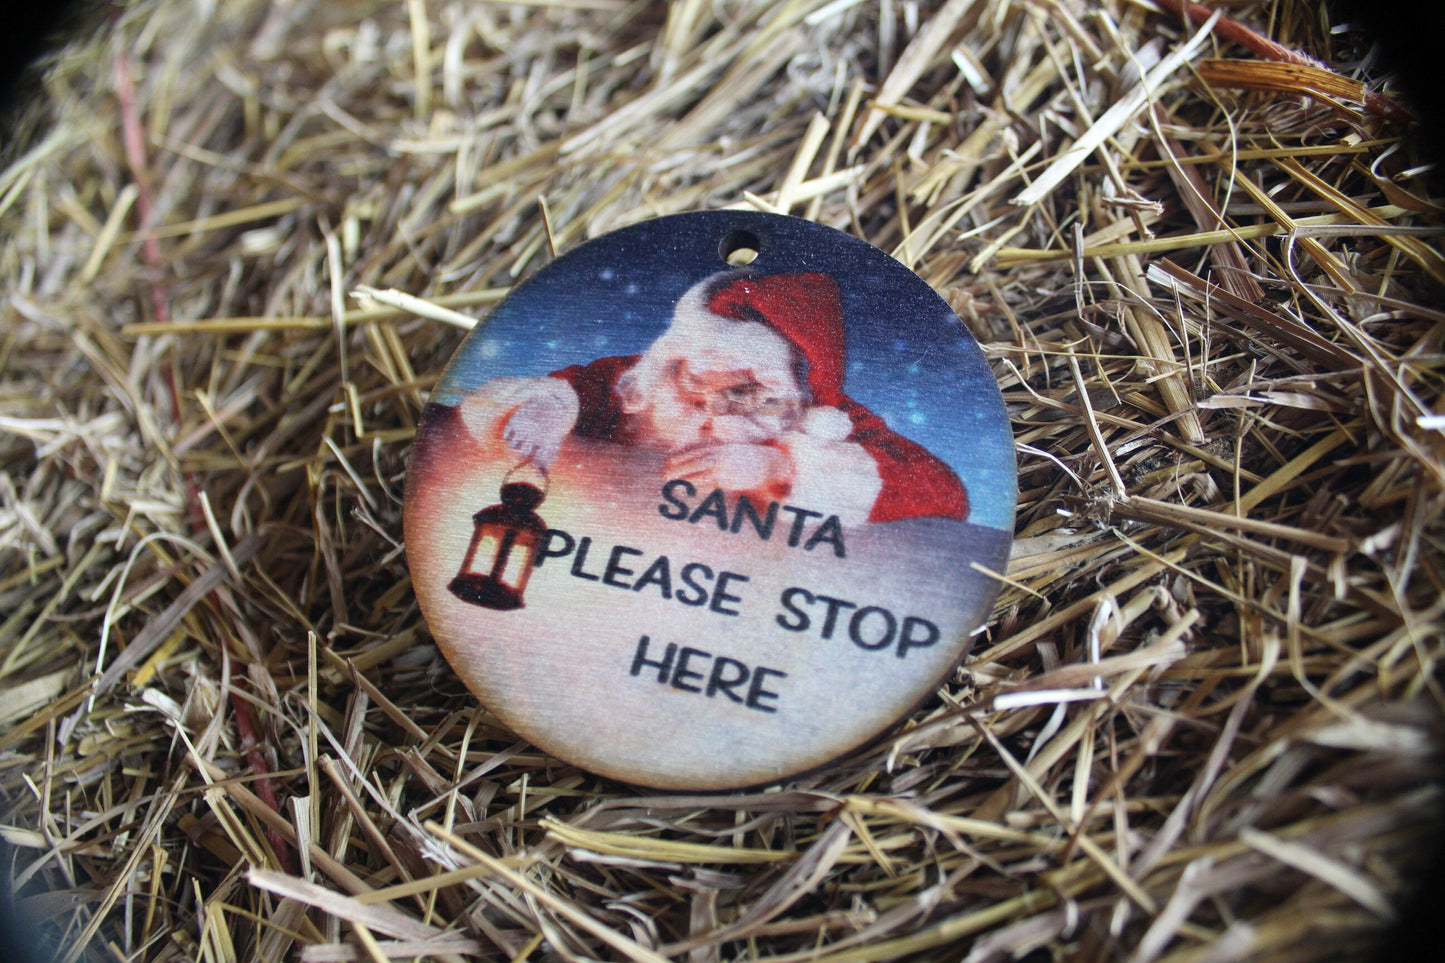 Santa Stop Here Believe Old Saint Nick Winter Kris Kringle Christmas Holiday Ornament Woodslice Keychain Gift Tag Round